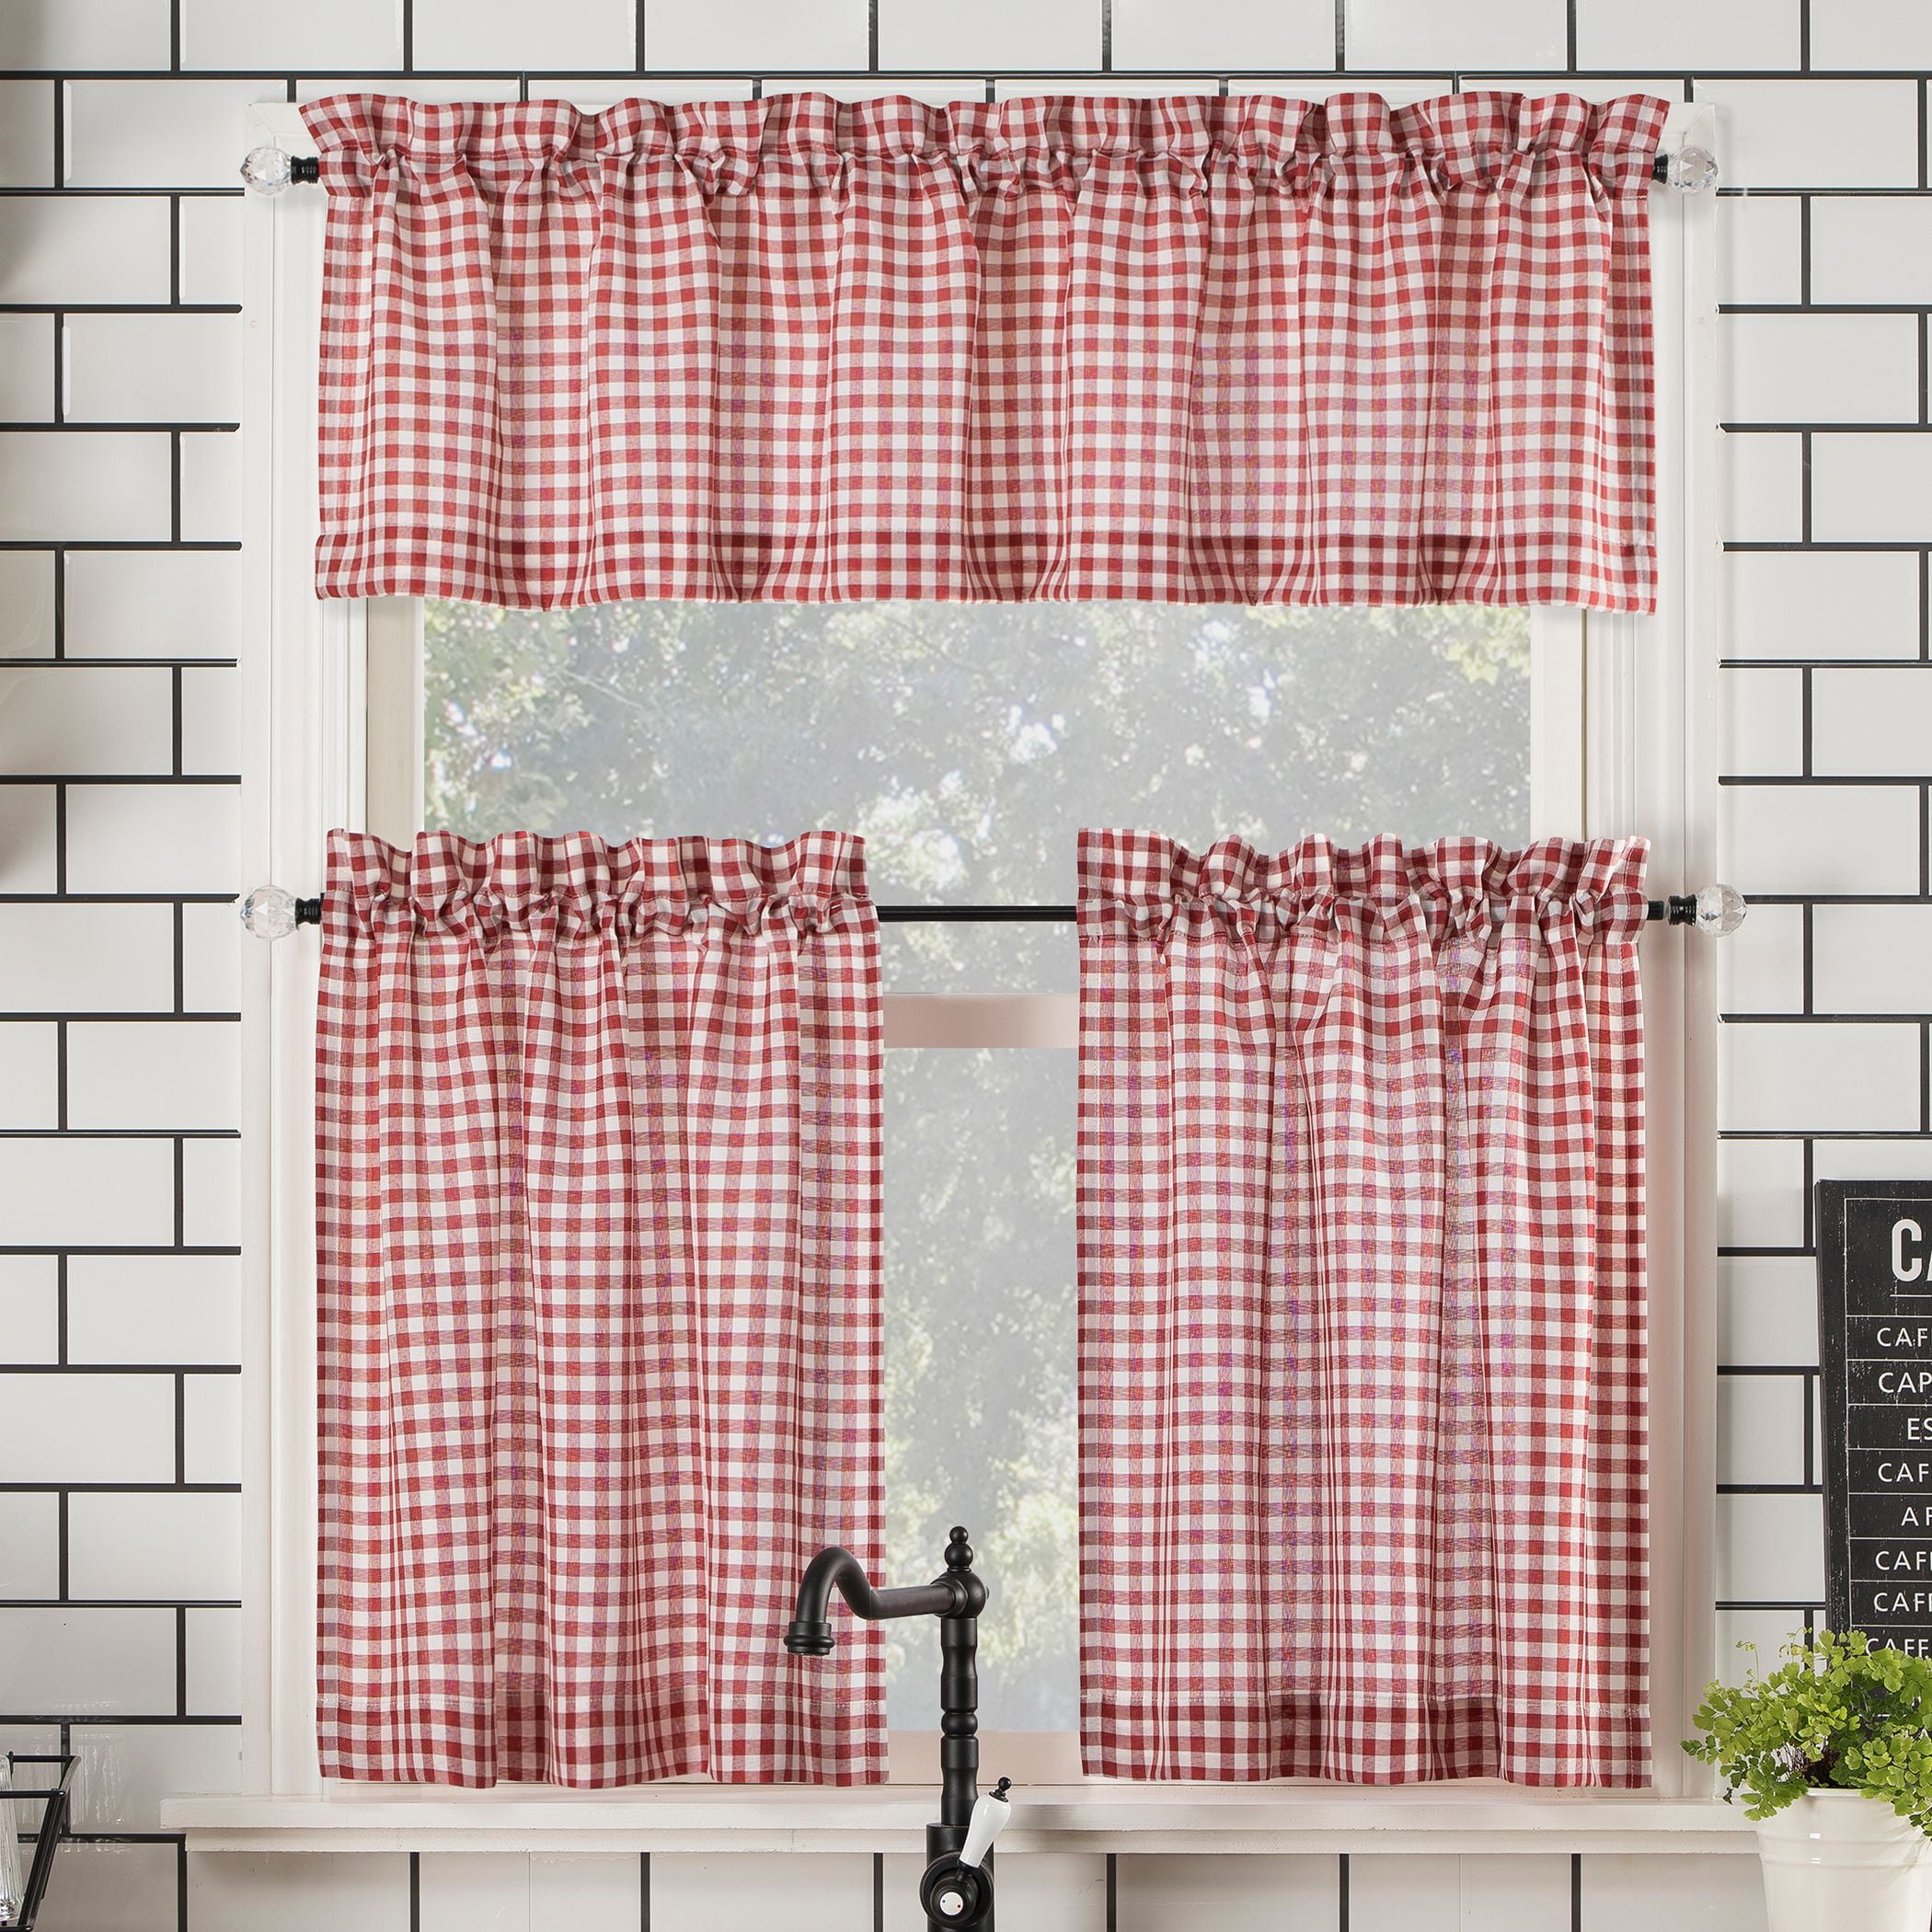  Tayney Kitchen Curtains Knife and Forks Utensil Window Curtains  and Valances Set 36 Inch, Black Short Tier Curtain for Kitchen, Cartoon  Small Kitchen Decor : Home & Kitchen